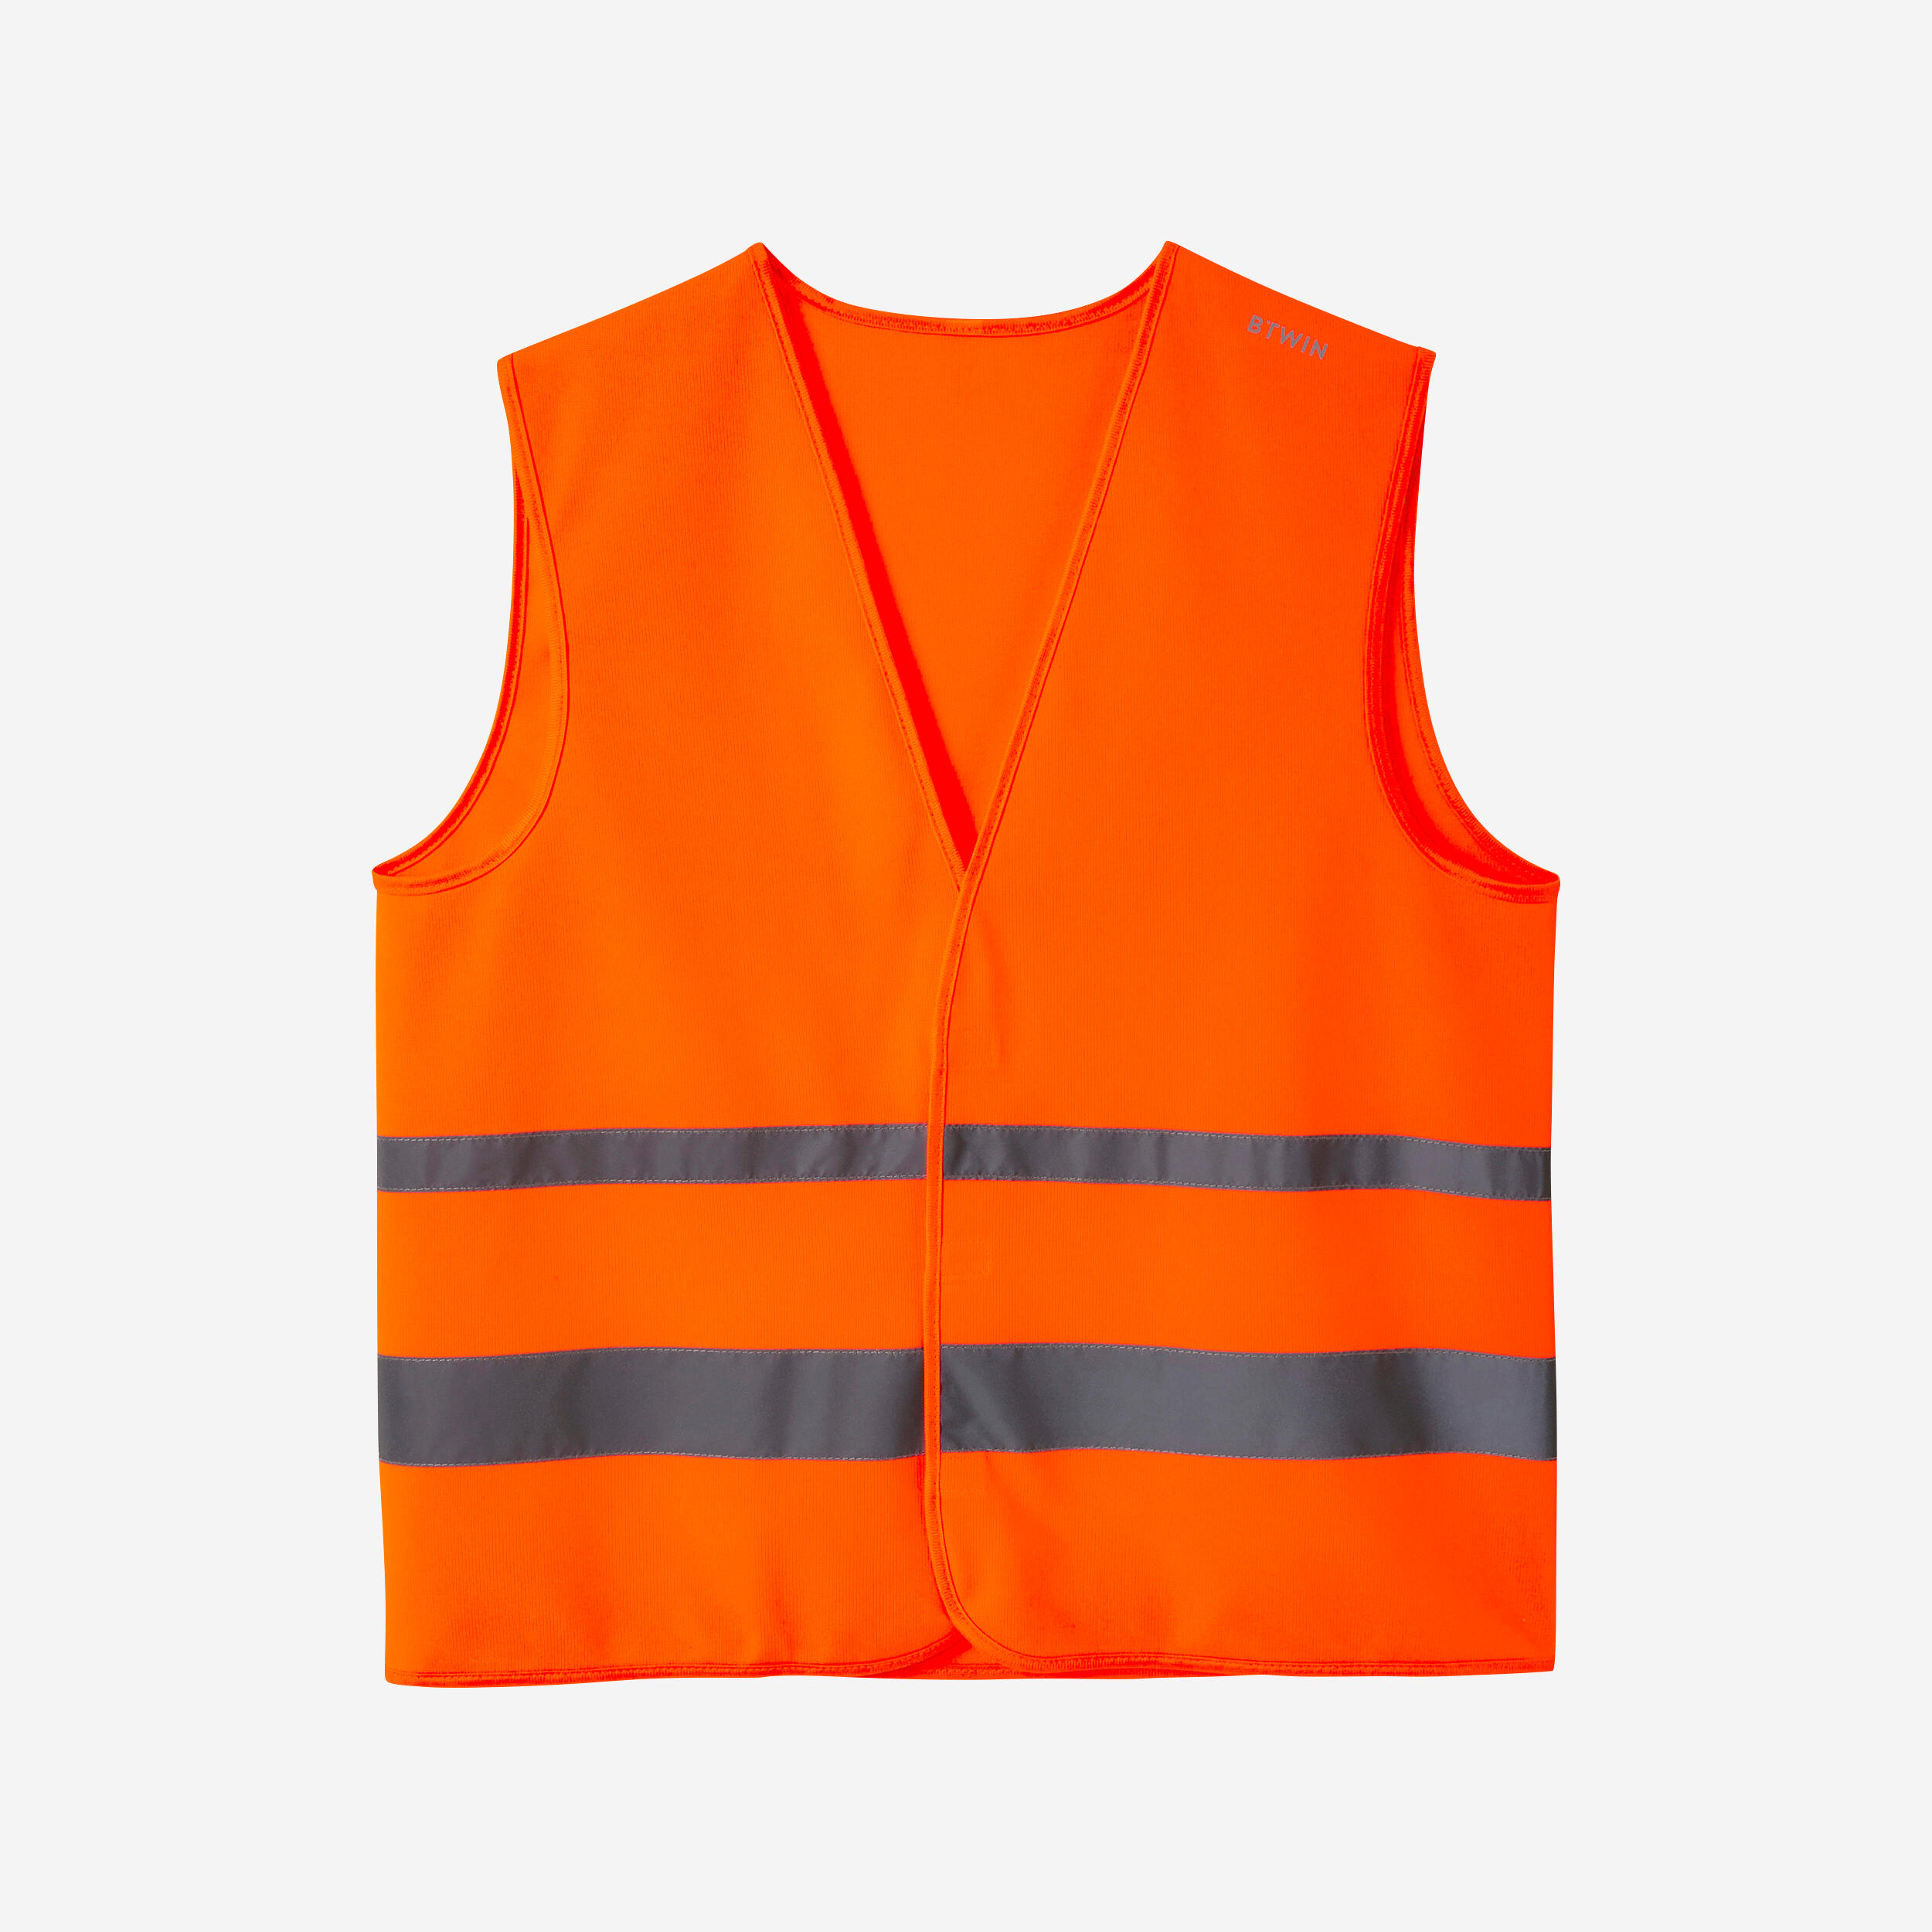 BTWIN Adult High Visibility Cycling Safety Vest - Neon Orange